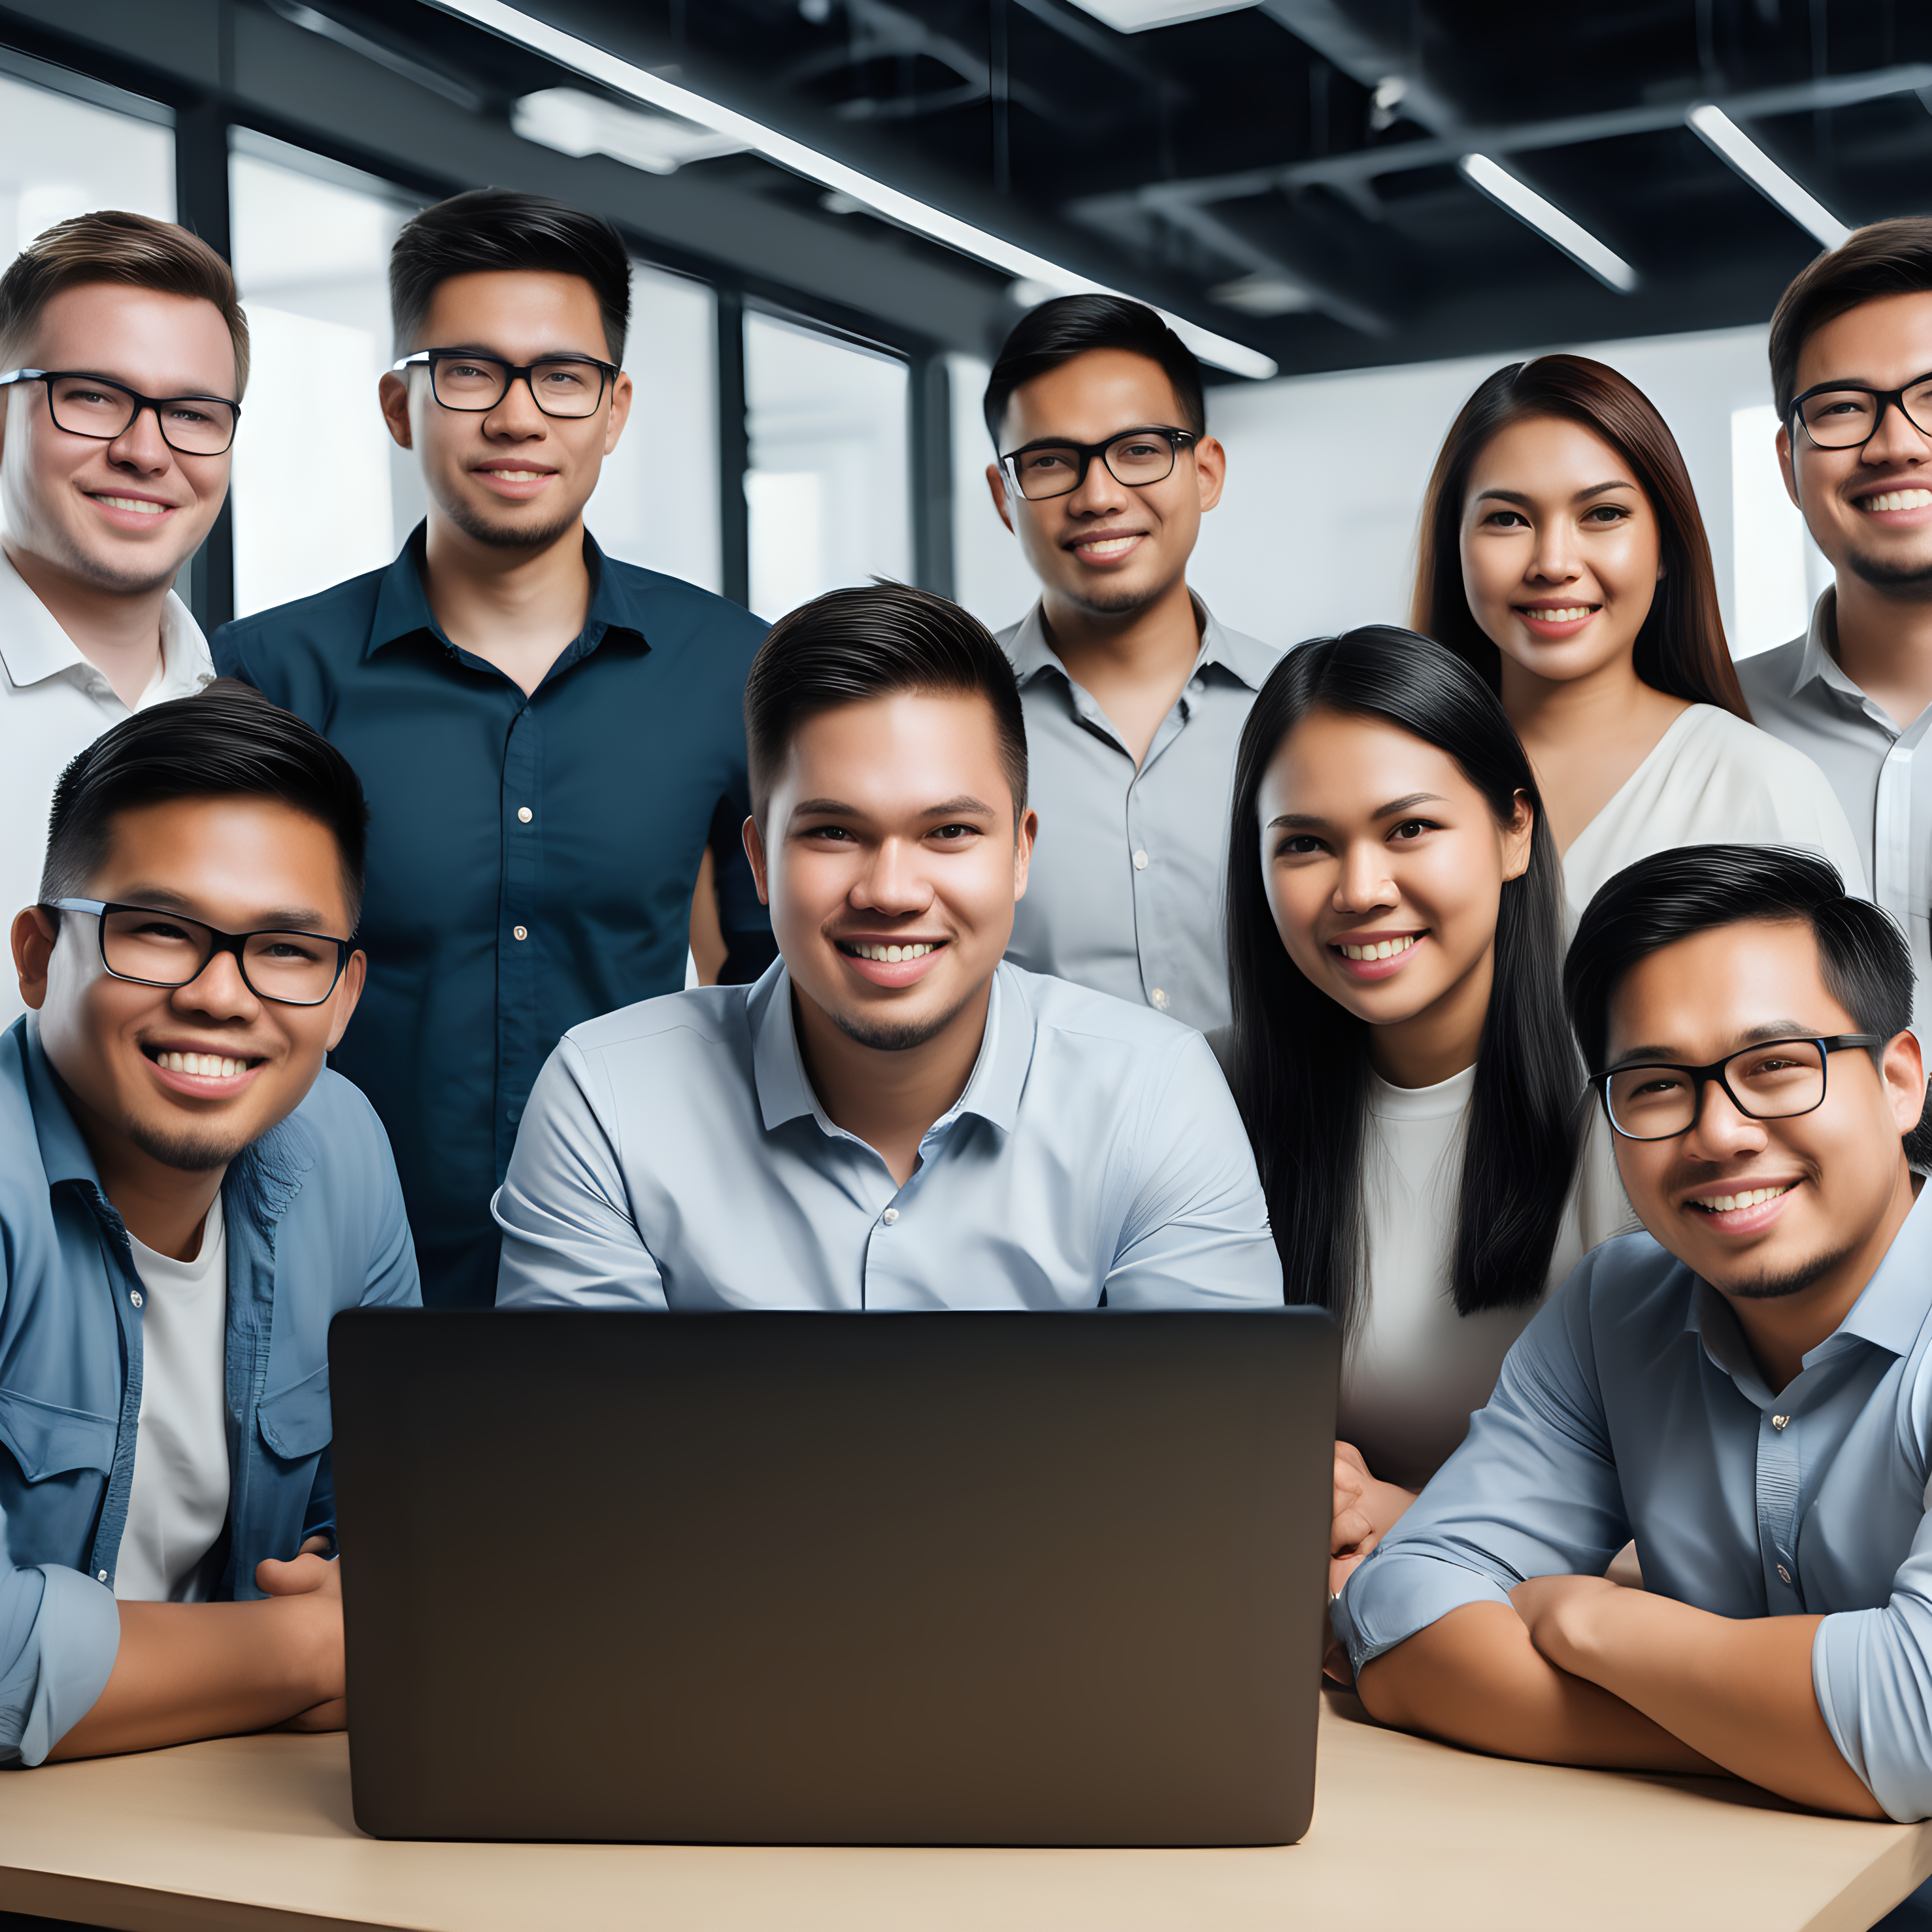 engaging and technical looking software development team mix of filipino and caucasian men and women.  Collaborating together and hard at work.